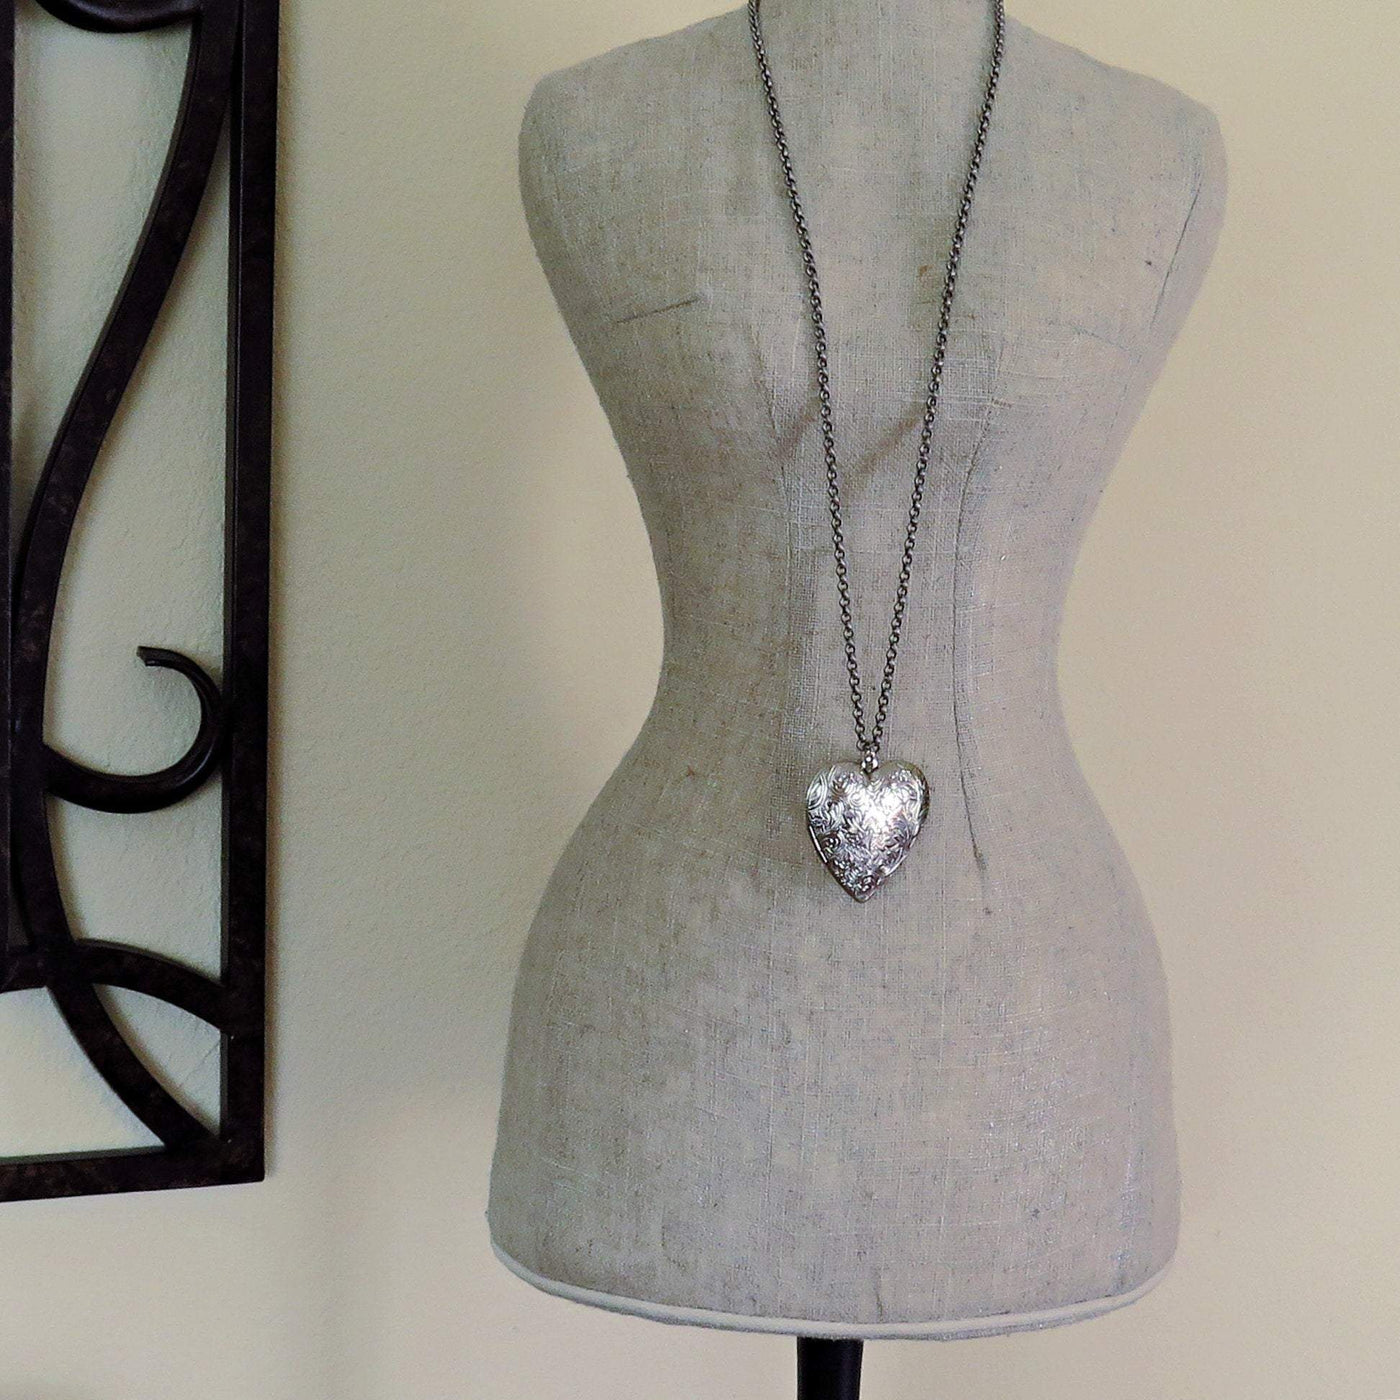 Large Silver Heart Locket Necklace